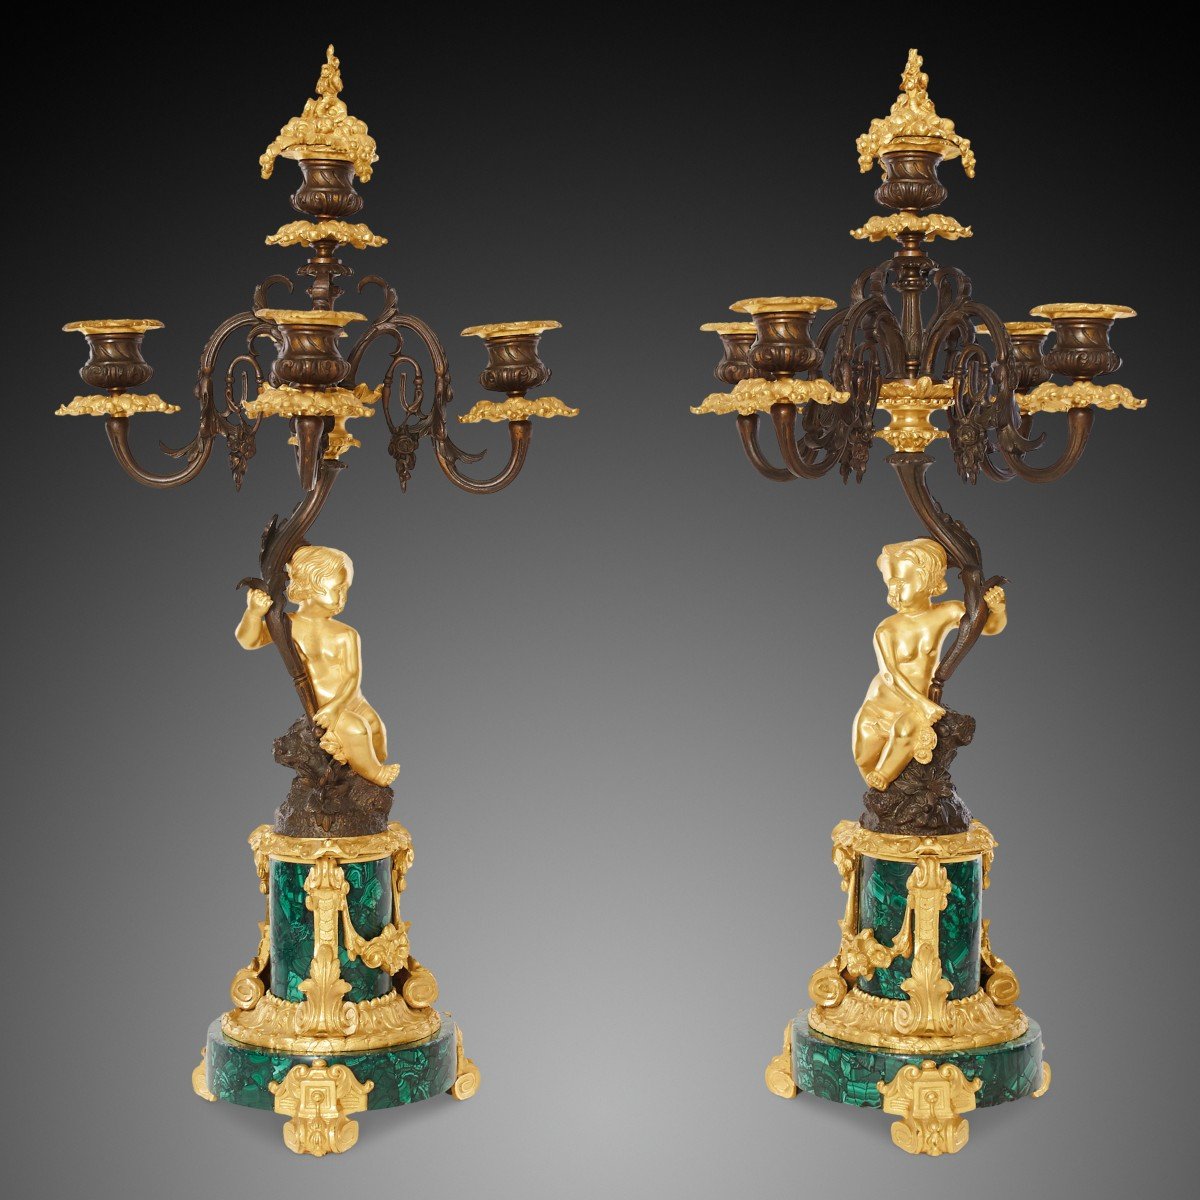 A Set Of Clocks And Candelabras In The Taste Of Louis Philippe Charles X, From The 19th Century-photo-3